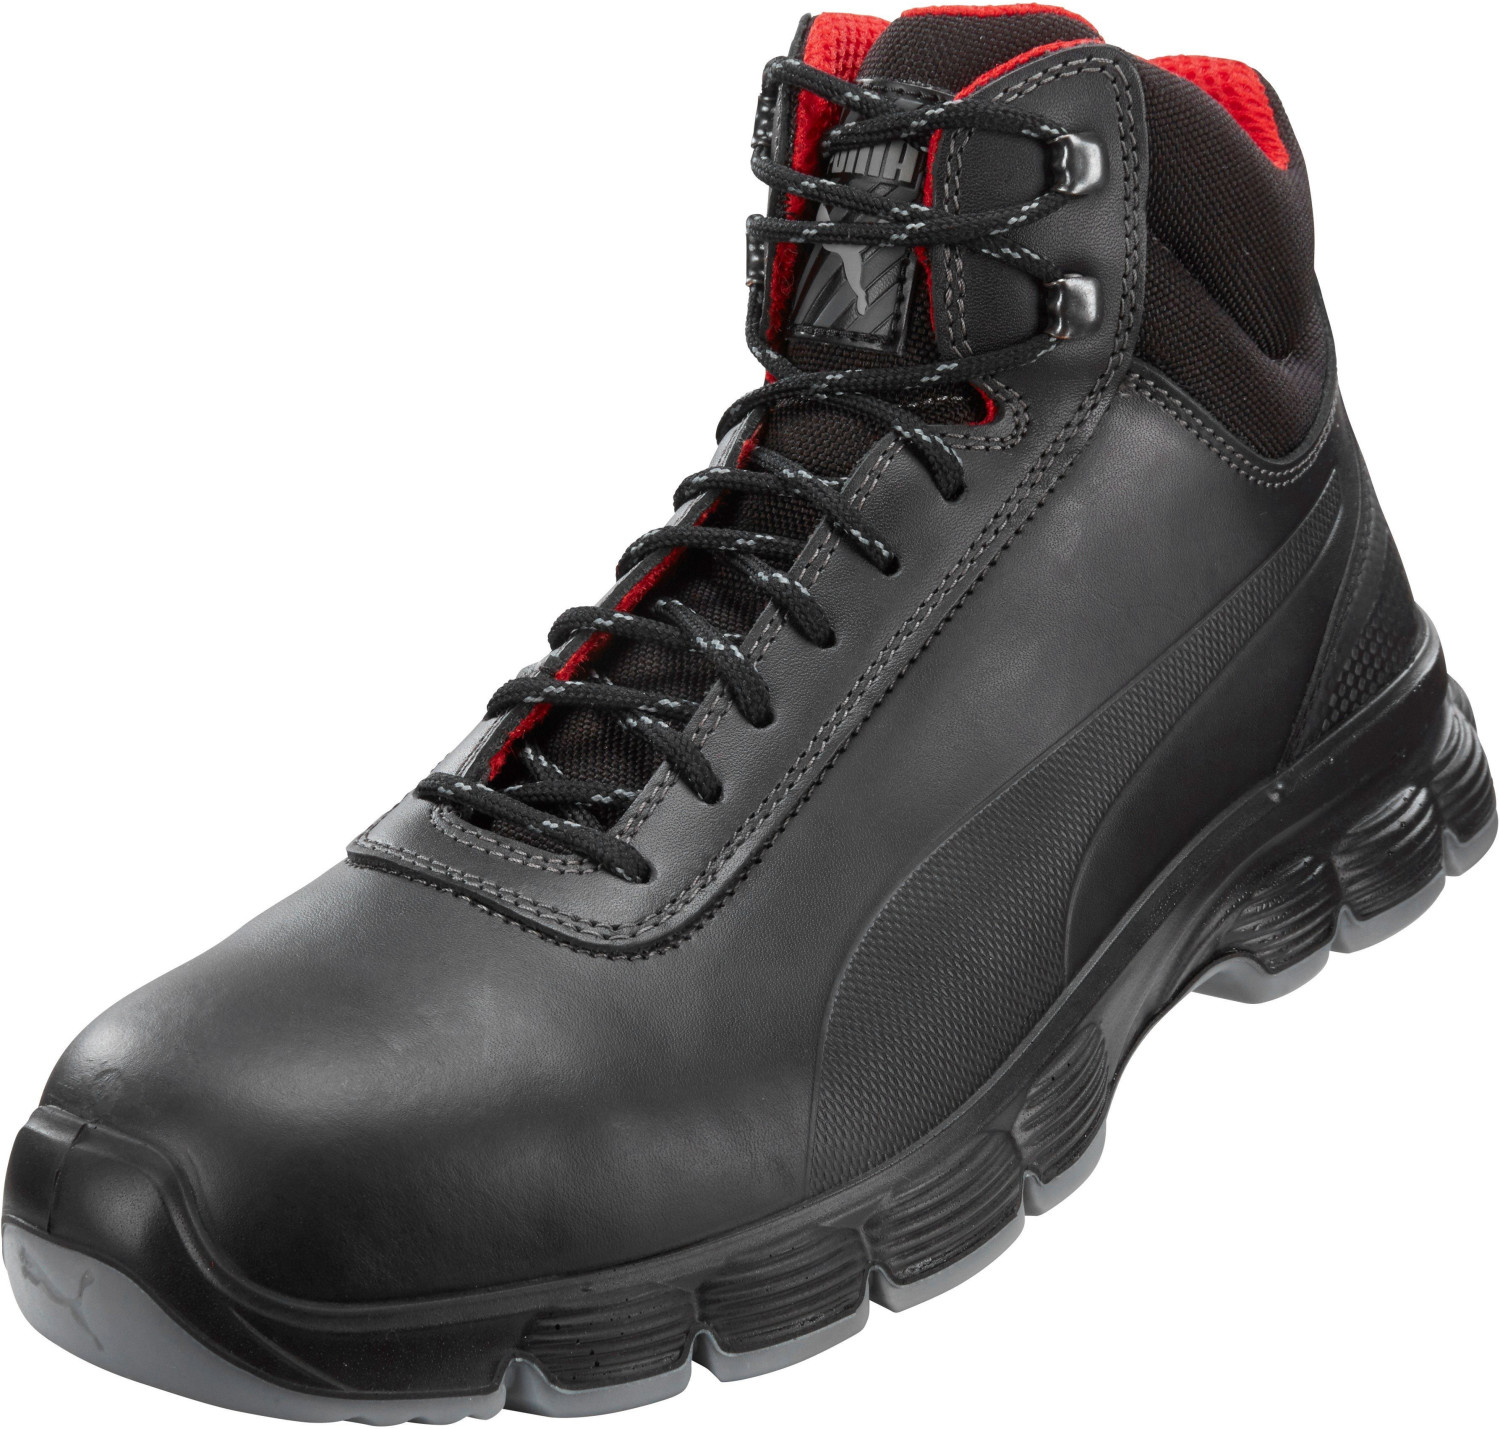 Buy Puma Safety Pioneer Mid (630101) black from £84.95 (Today) – Best Deals  on